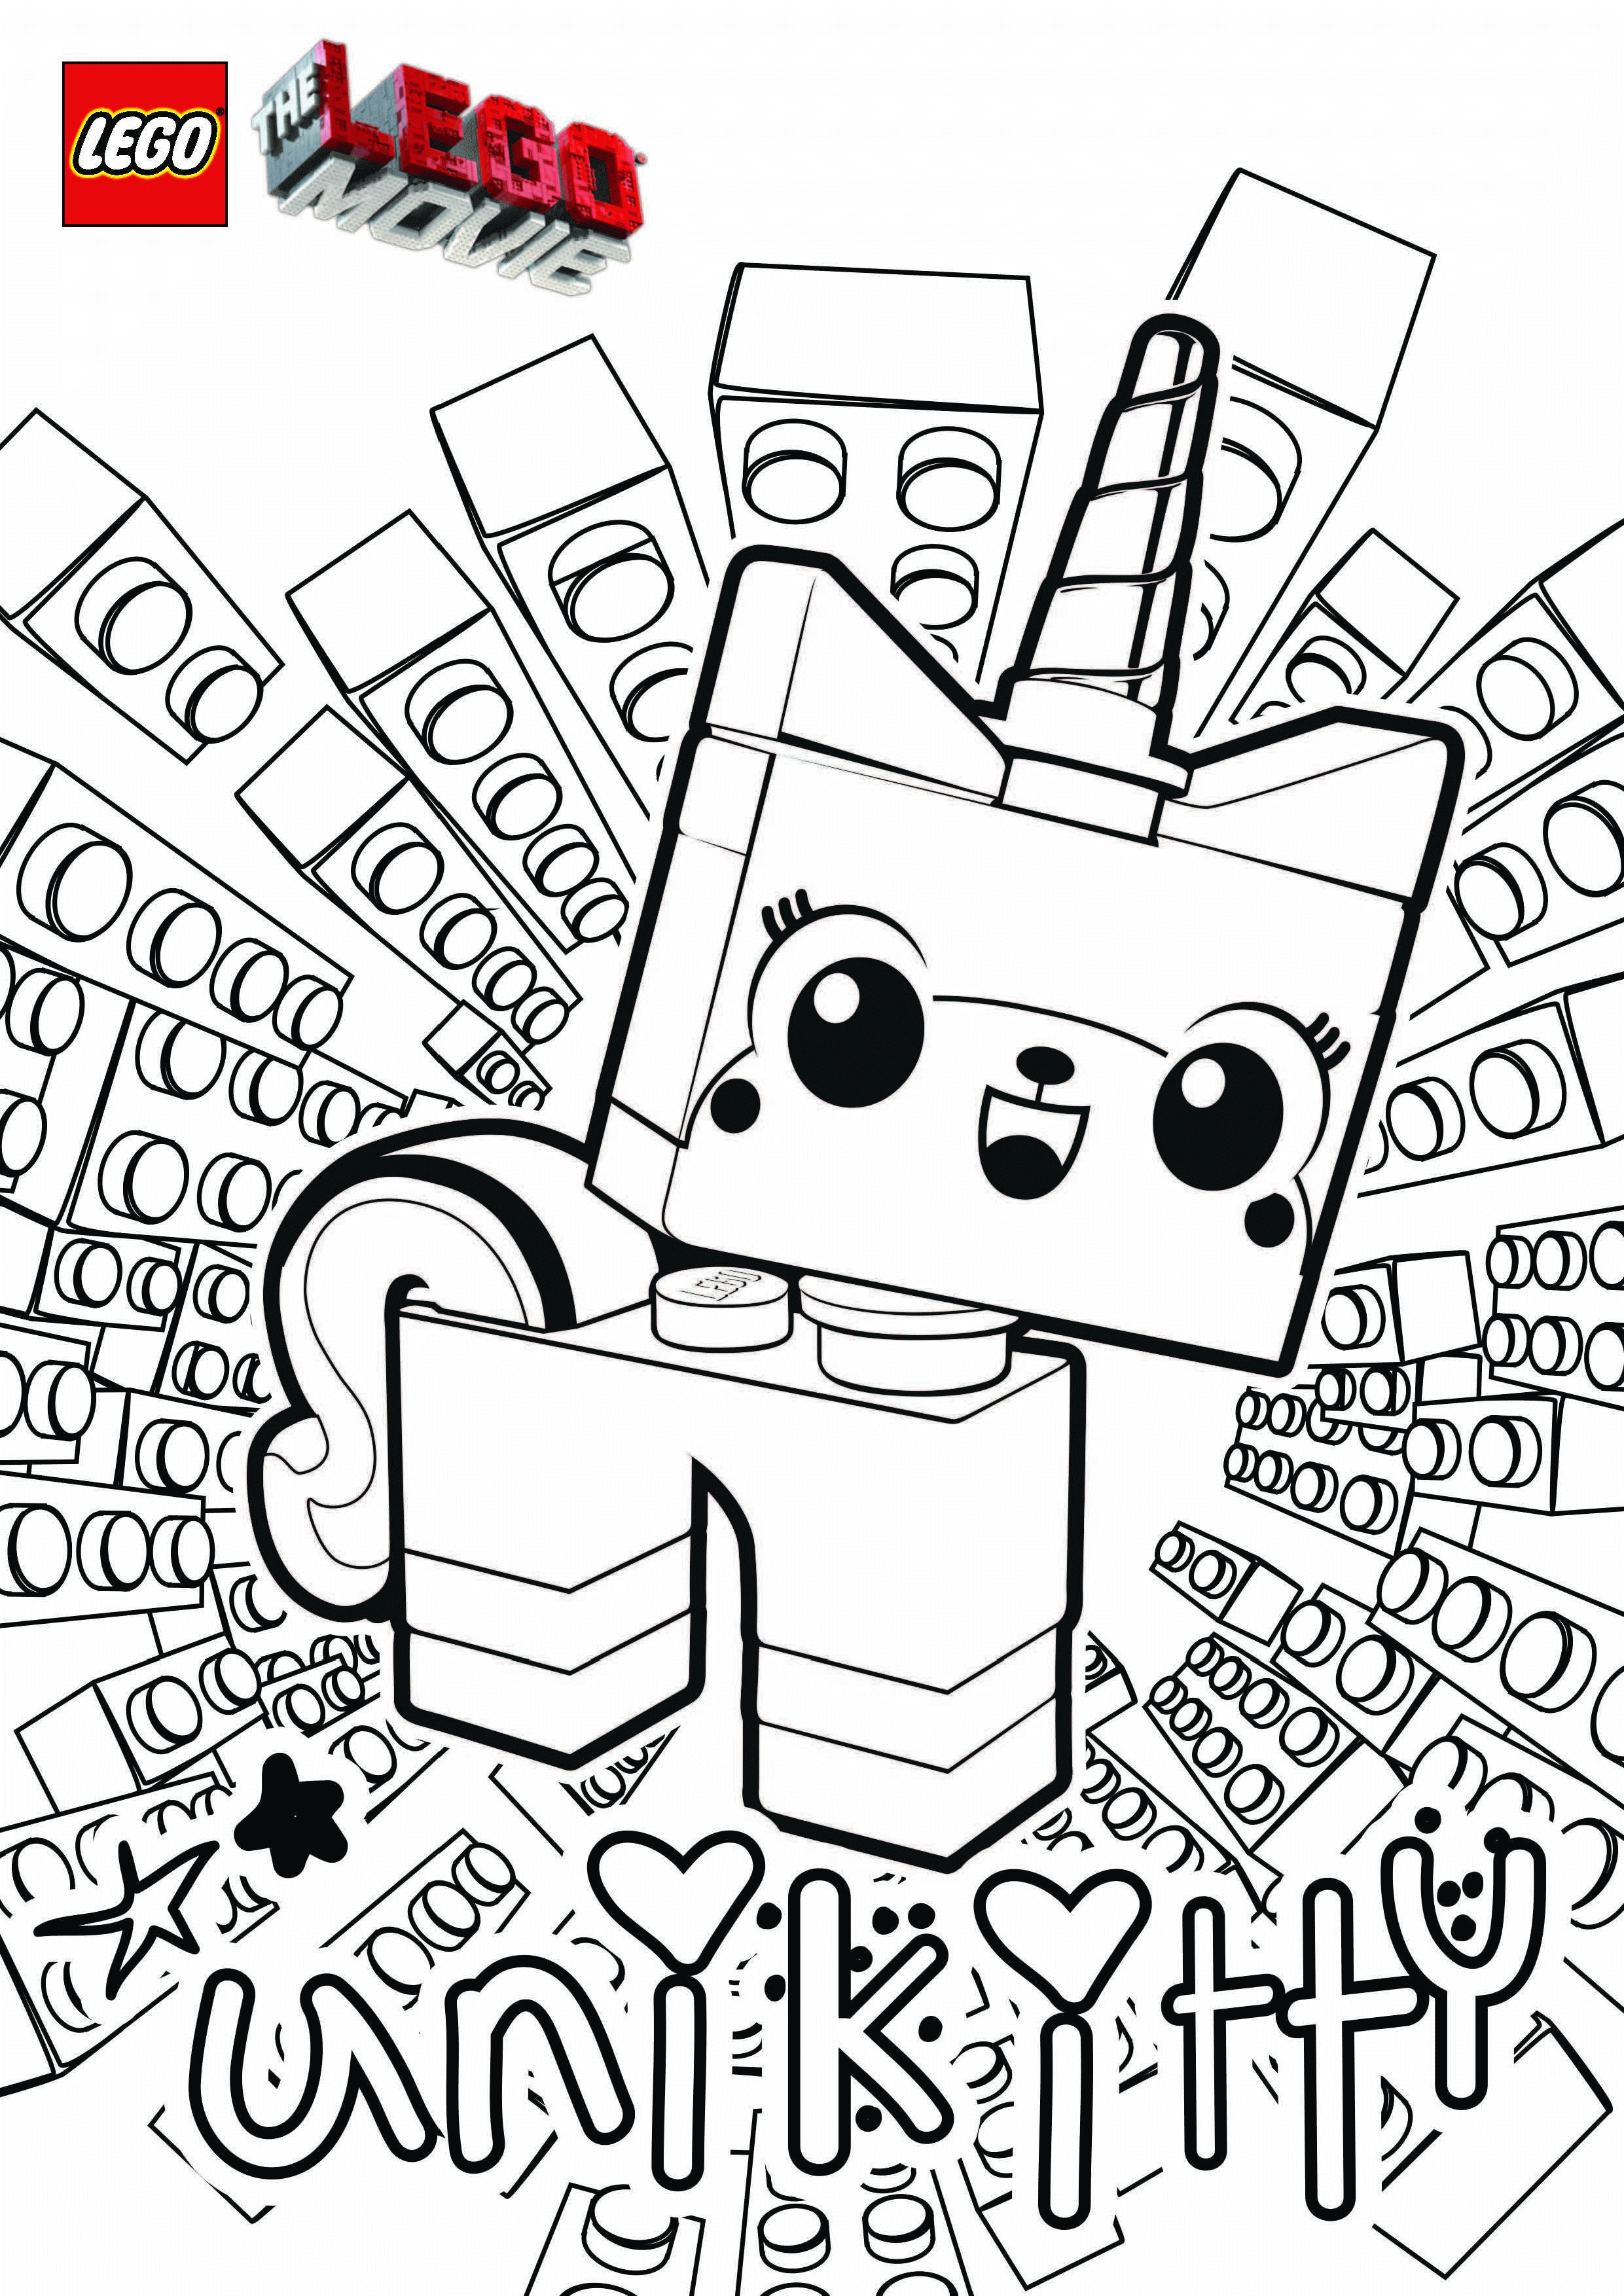 colouring-pages-lego-unicorn-clip-art-library